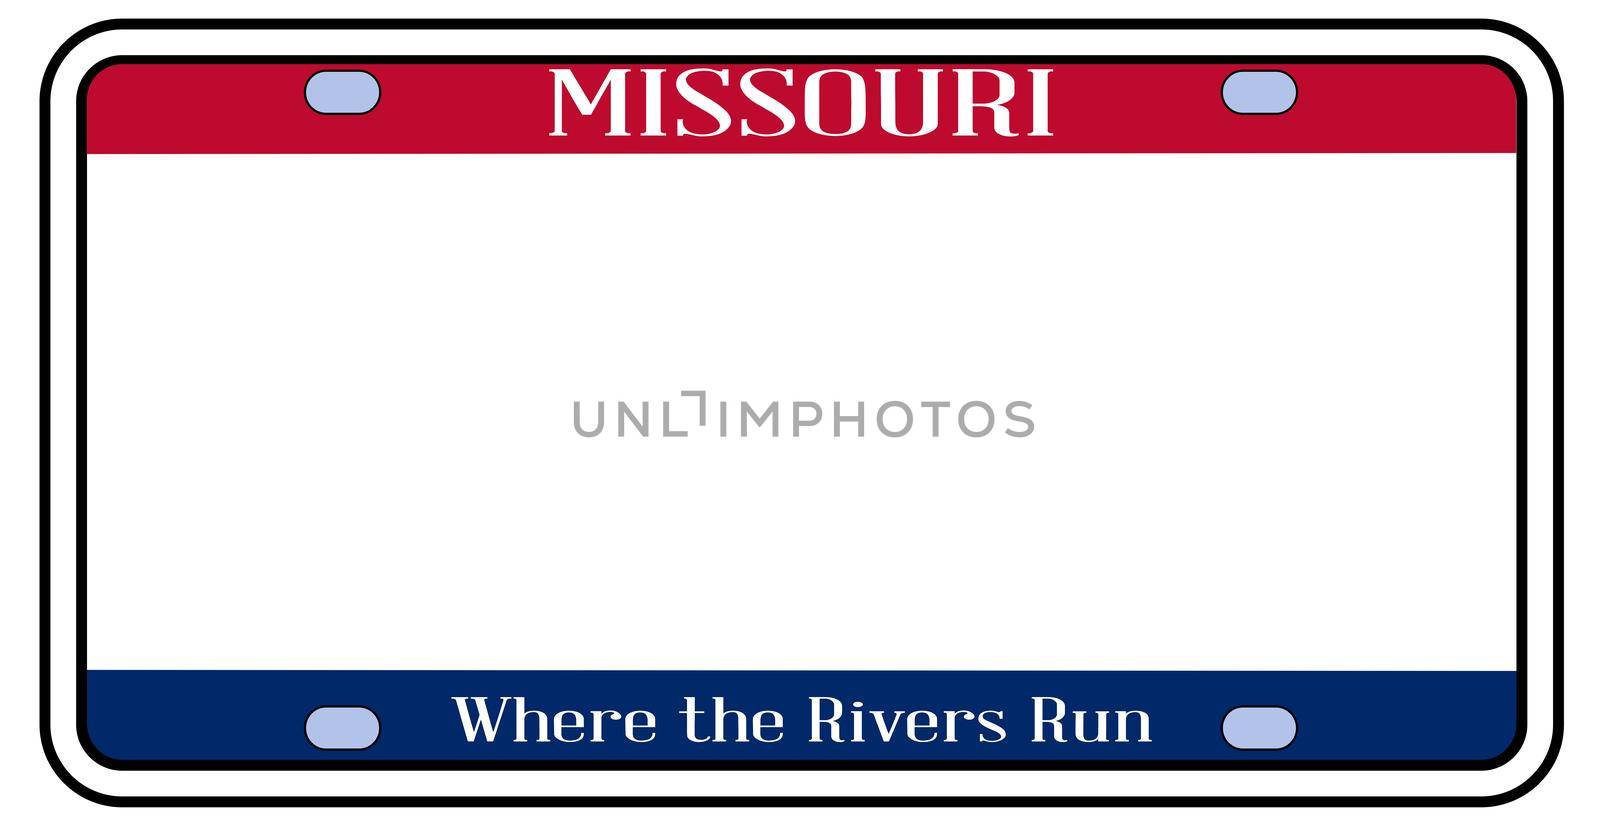 Blank Missouri state license plate in the colors of the state flag over a white background